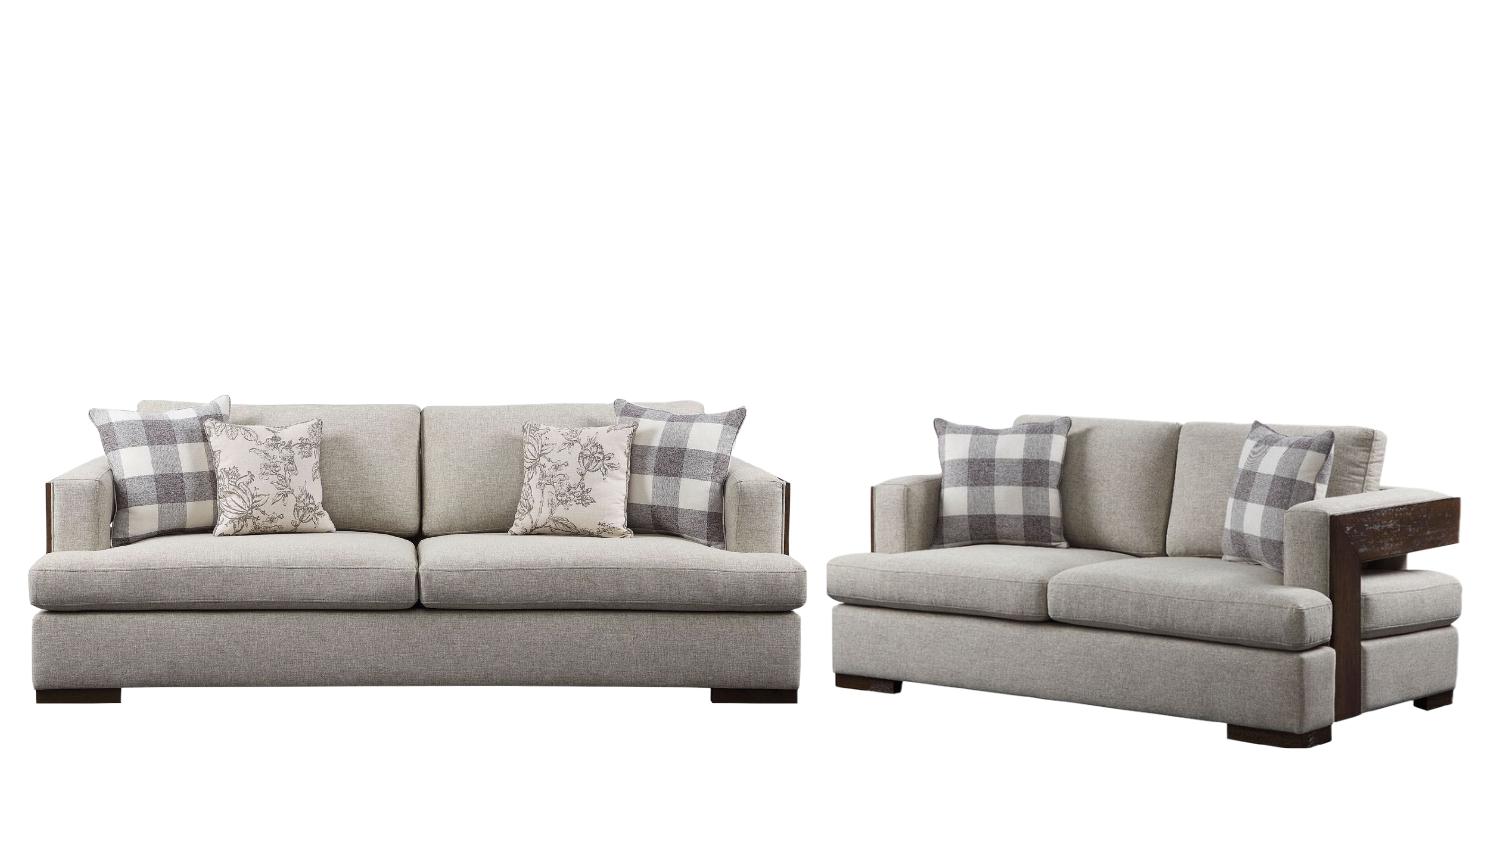 Transitional Sofa and Loveseat Set Niamey 54850-2pcs in Beige Fabric